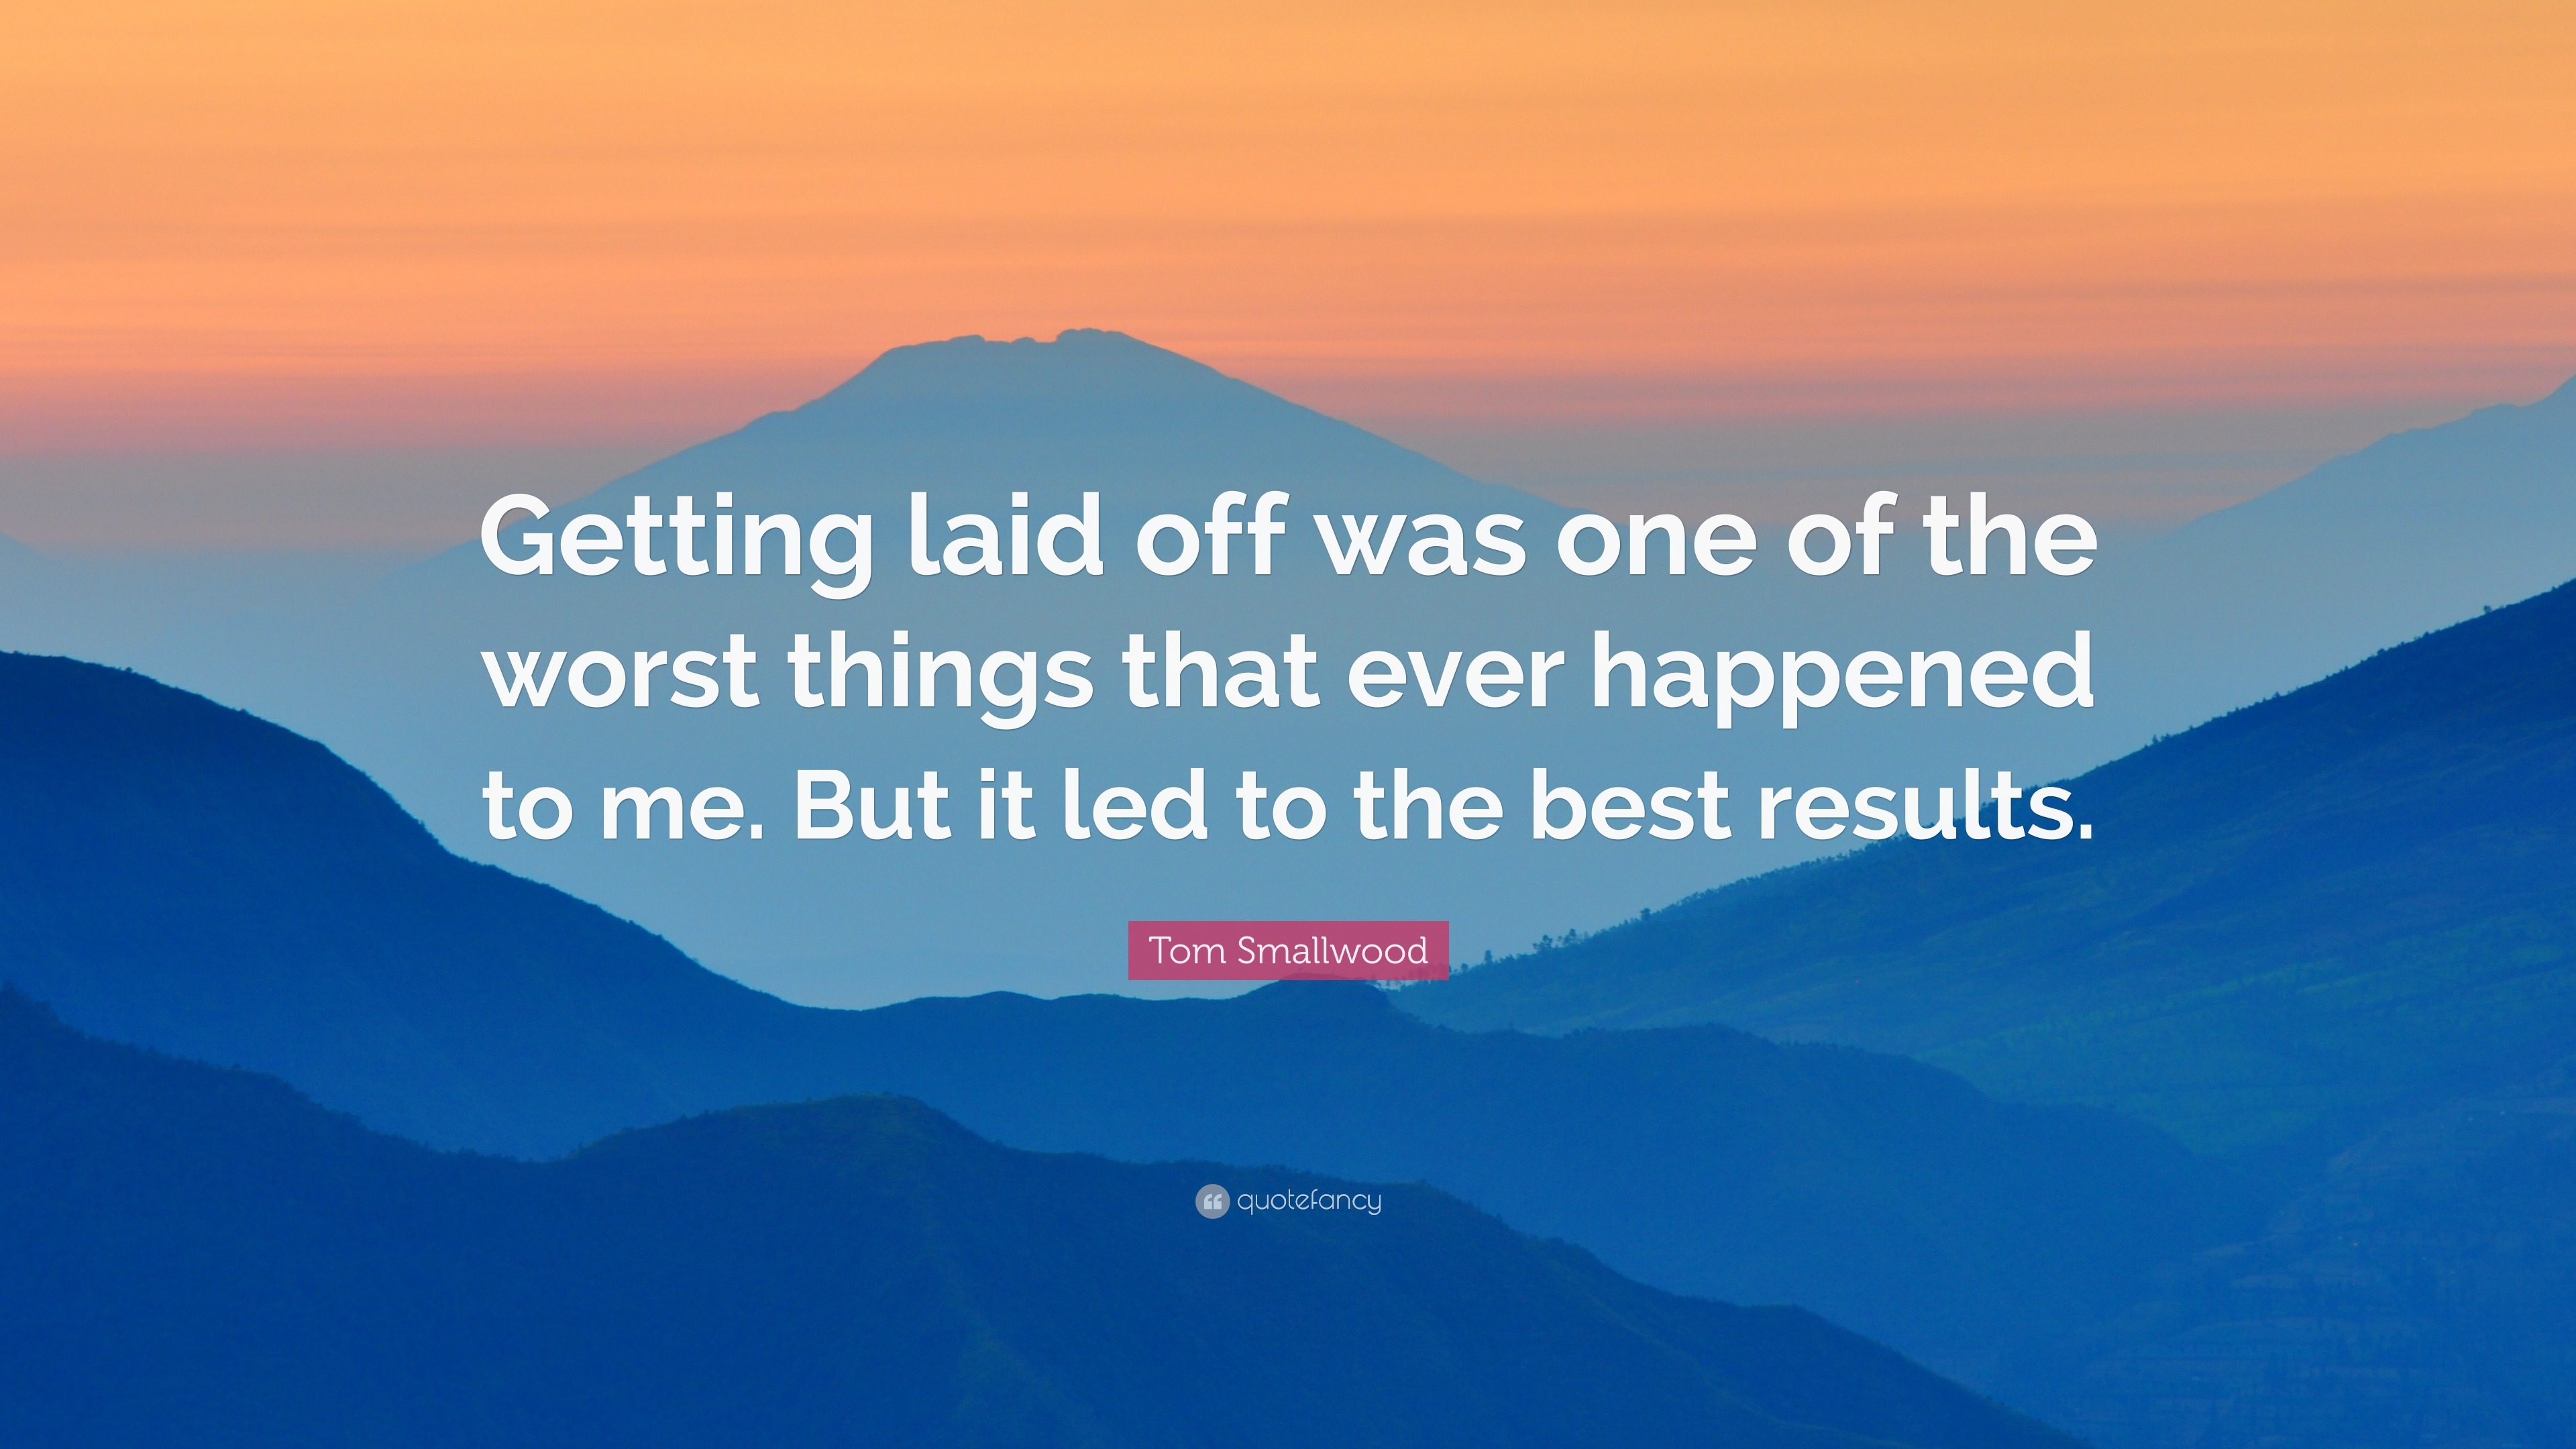 Tom Smallwood Quote: “Getting laid off was one of the worst things that ever happened to me. But ...